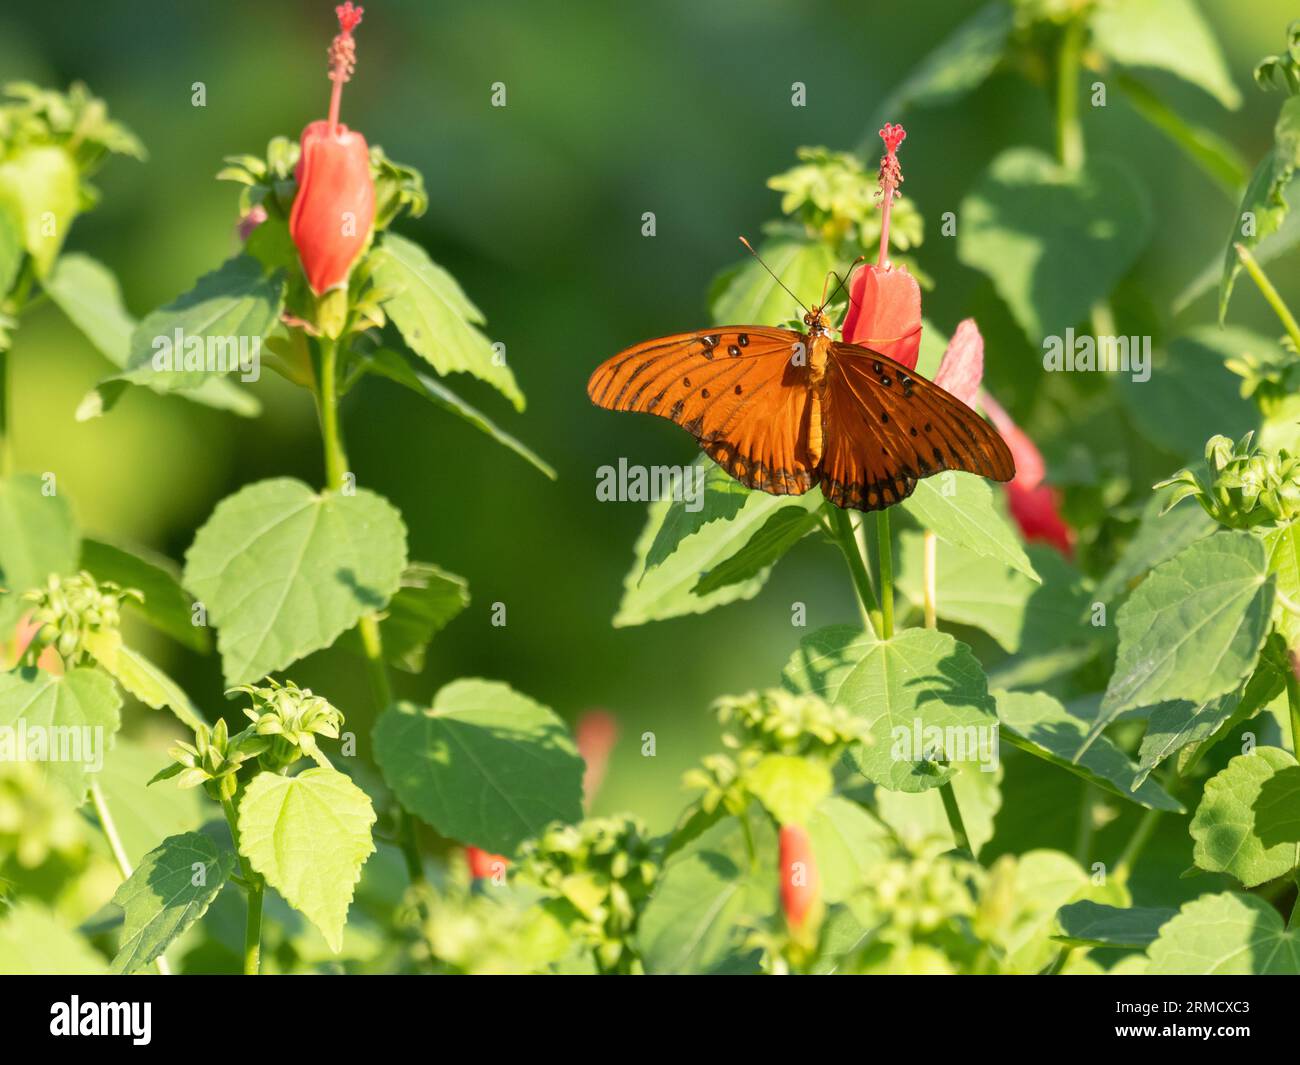 Orange Gulf fritillary getting nectar from a red Turk's Cap flower. Photographed with a shallow depth of field in Texas. Stock Photo